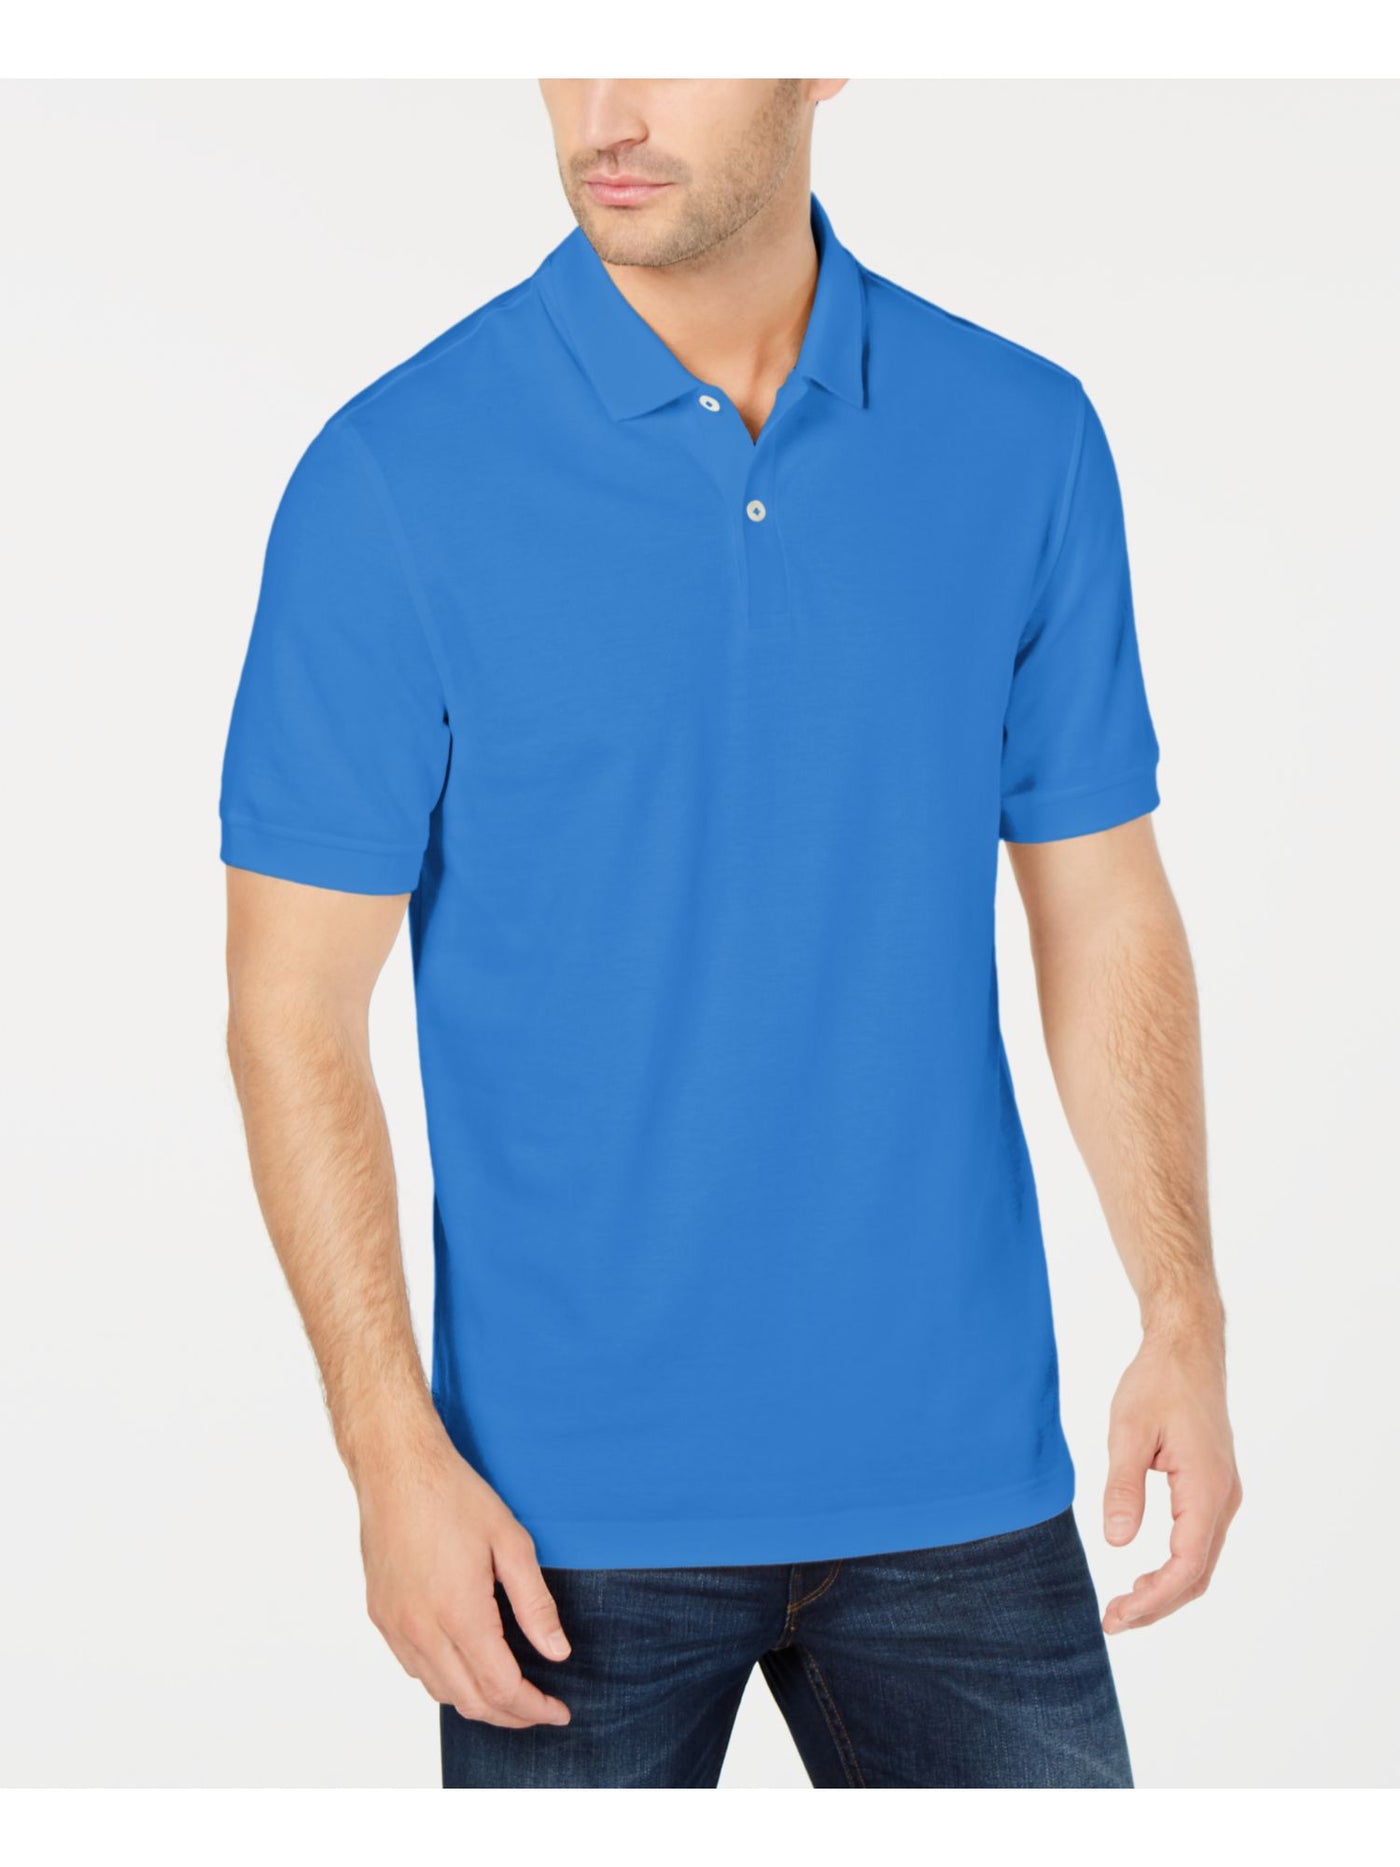 CLUBROOM Mens Blue Classic Fit Performance Stretch Polo XXL